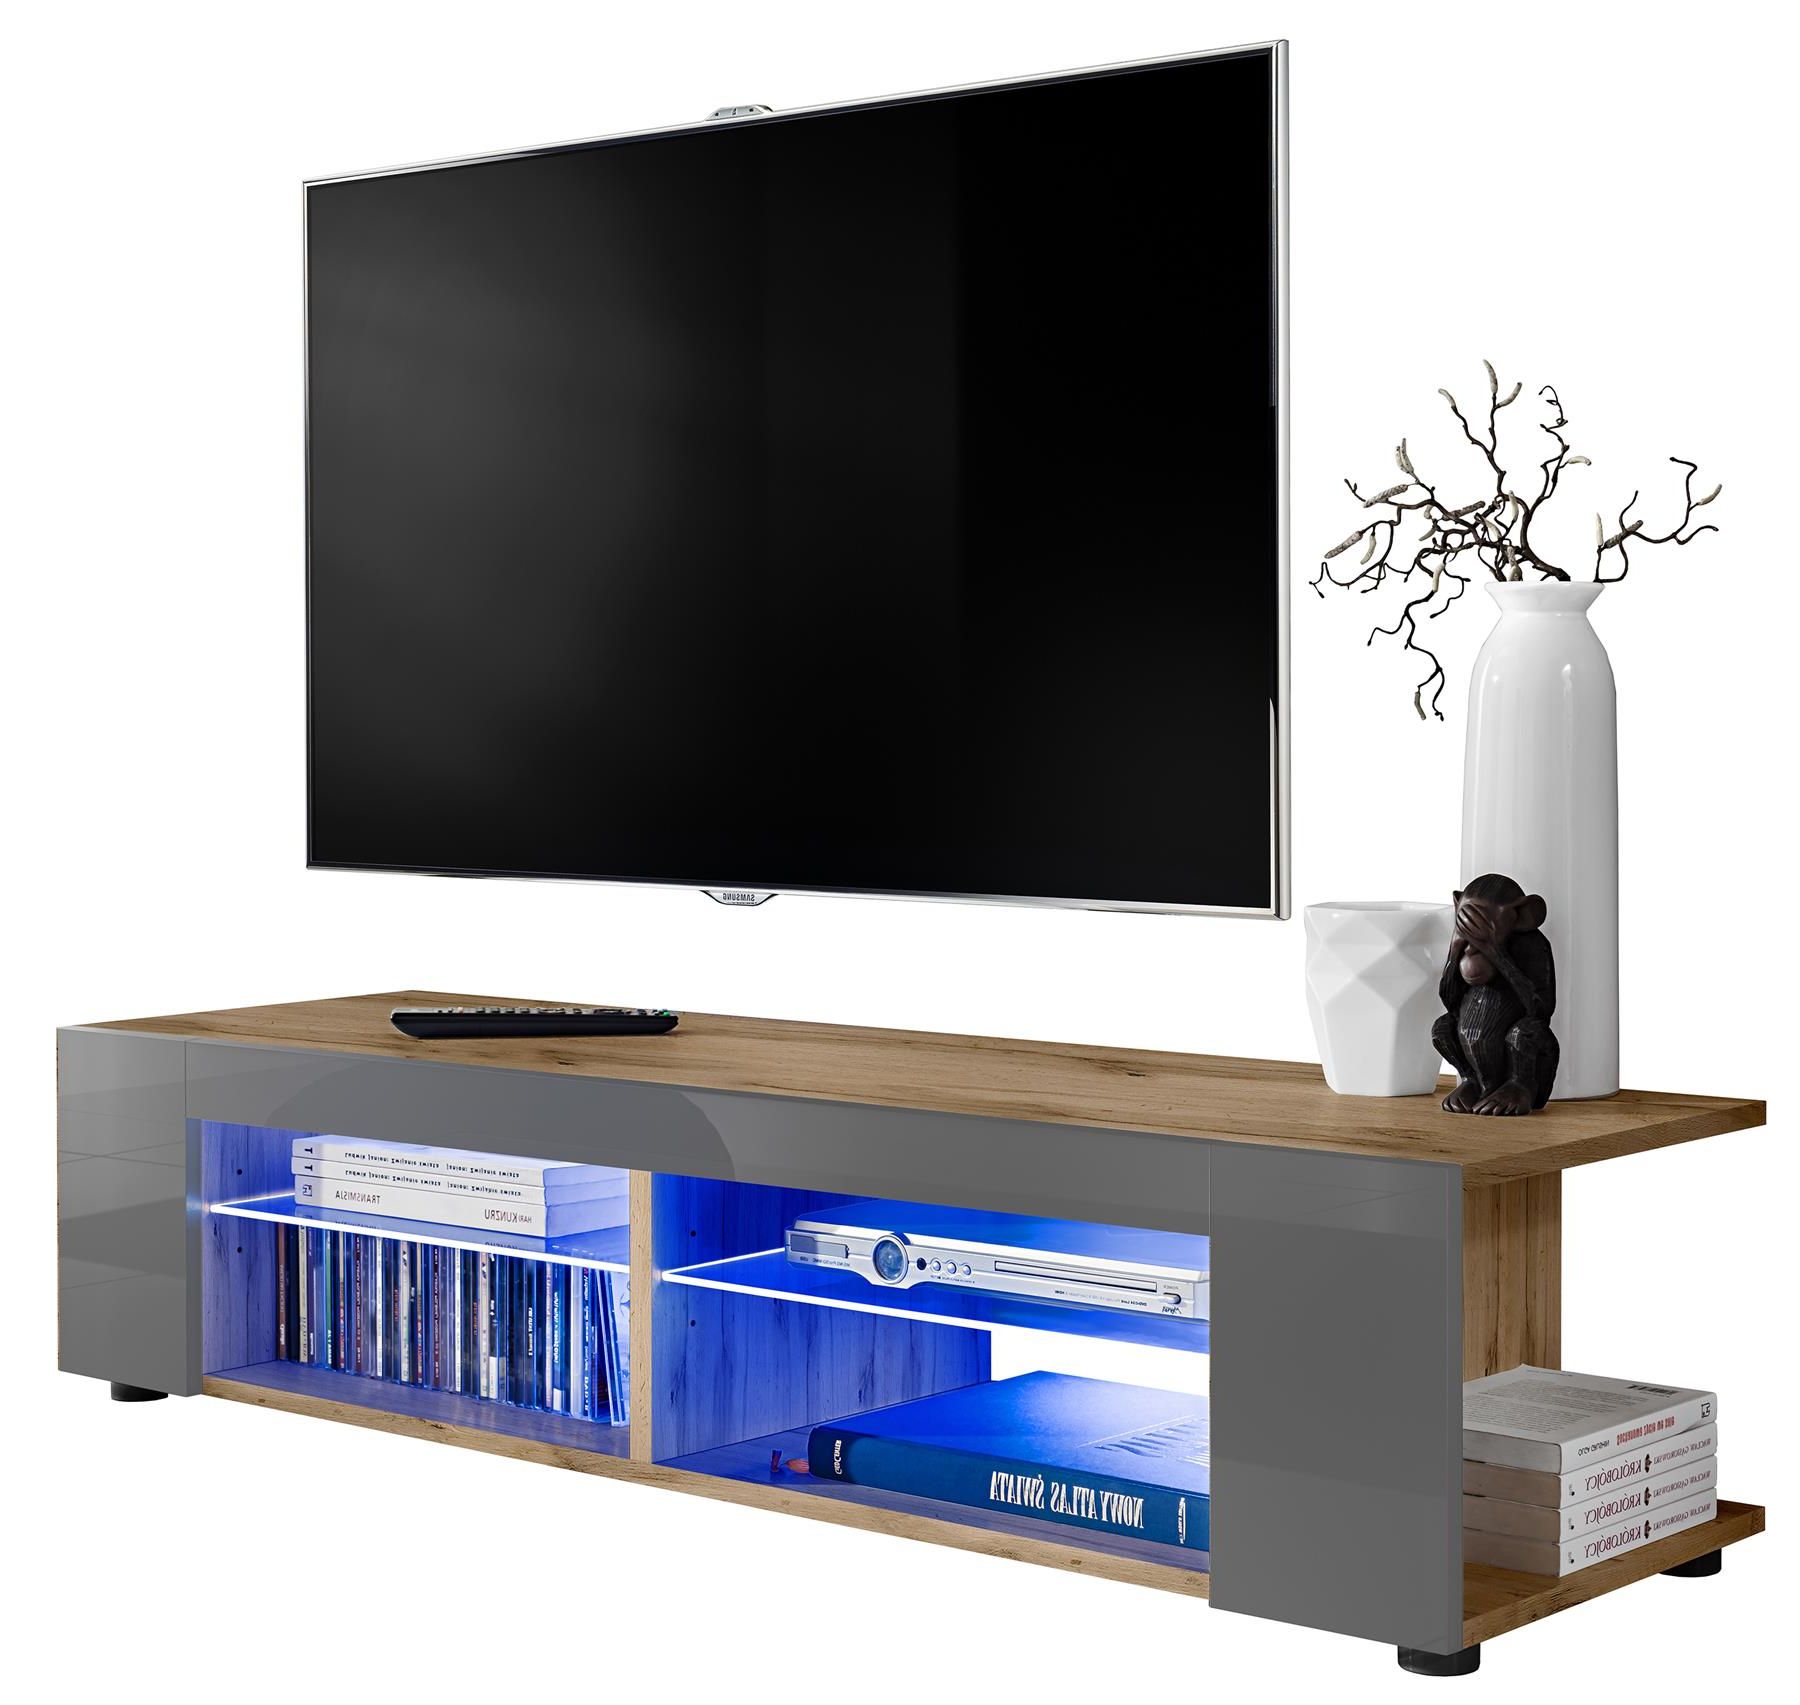 Tv Stand Cabinet Led Shelf Entertainment Media Center Within Zimtown Modern Tv Stands High Gloss Media Console Cabinet With Led Shelf And Drawers (View 4 of 20)